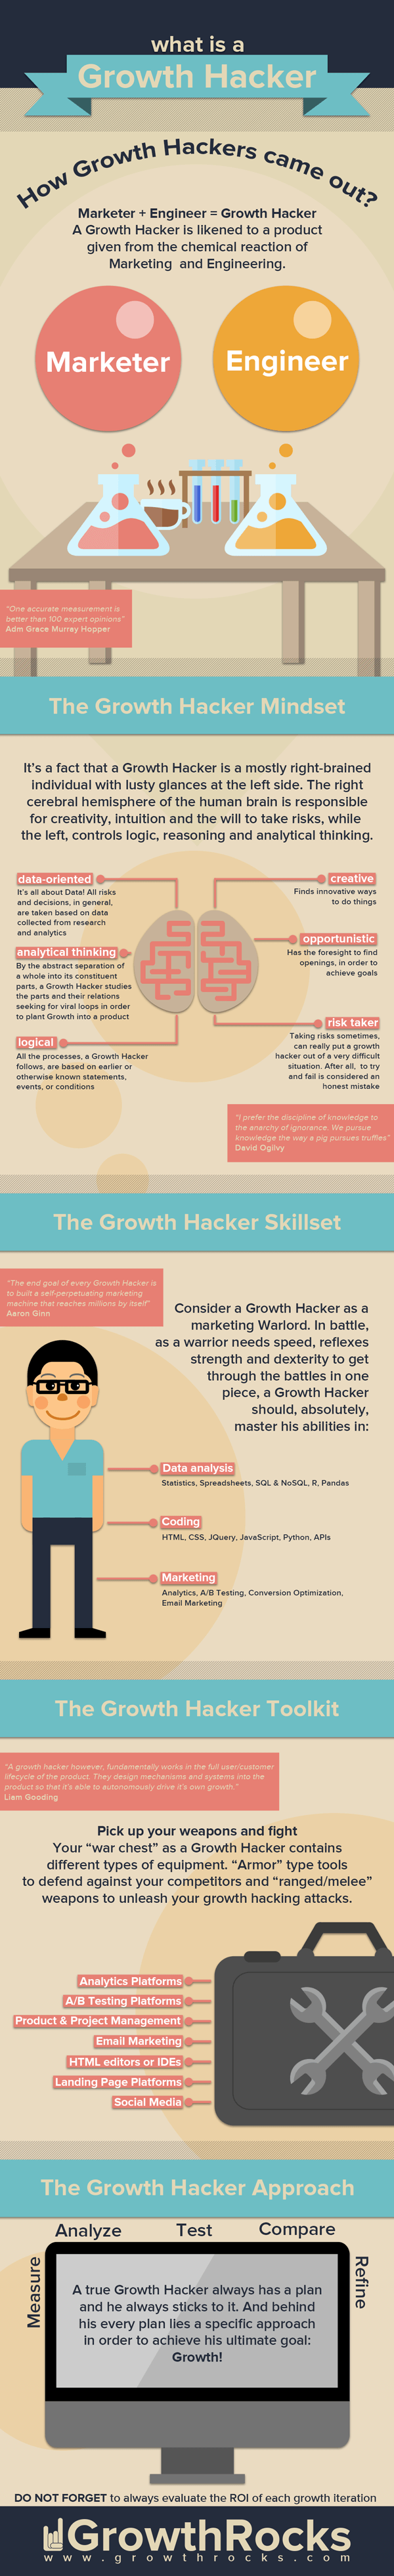 What Is A Growth Hacker?